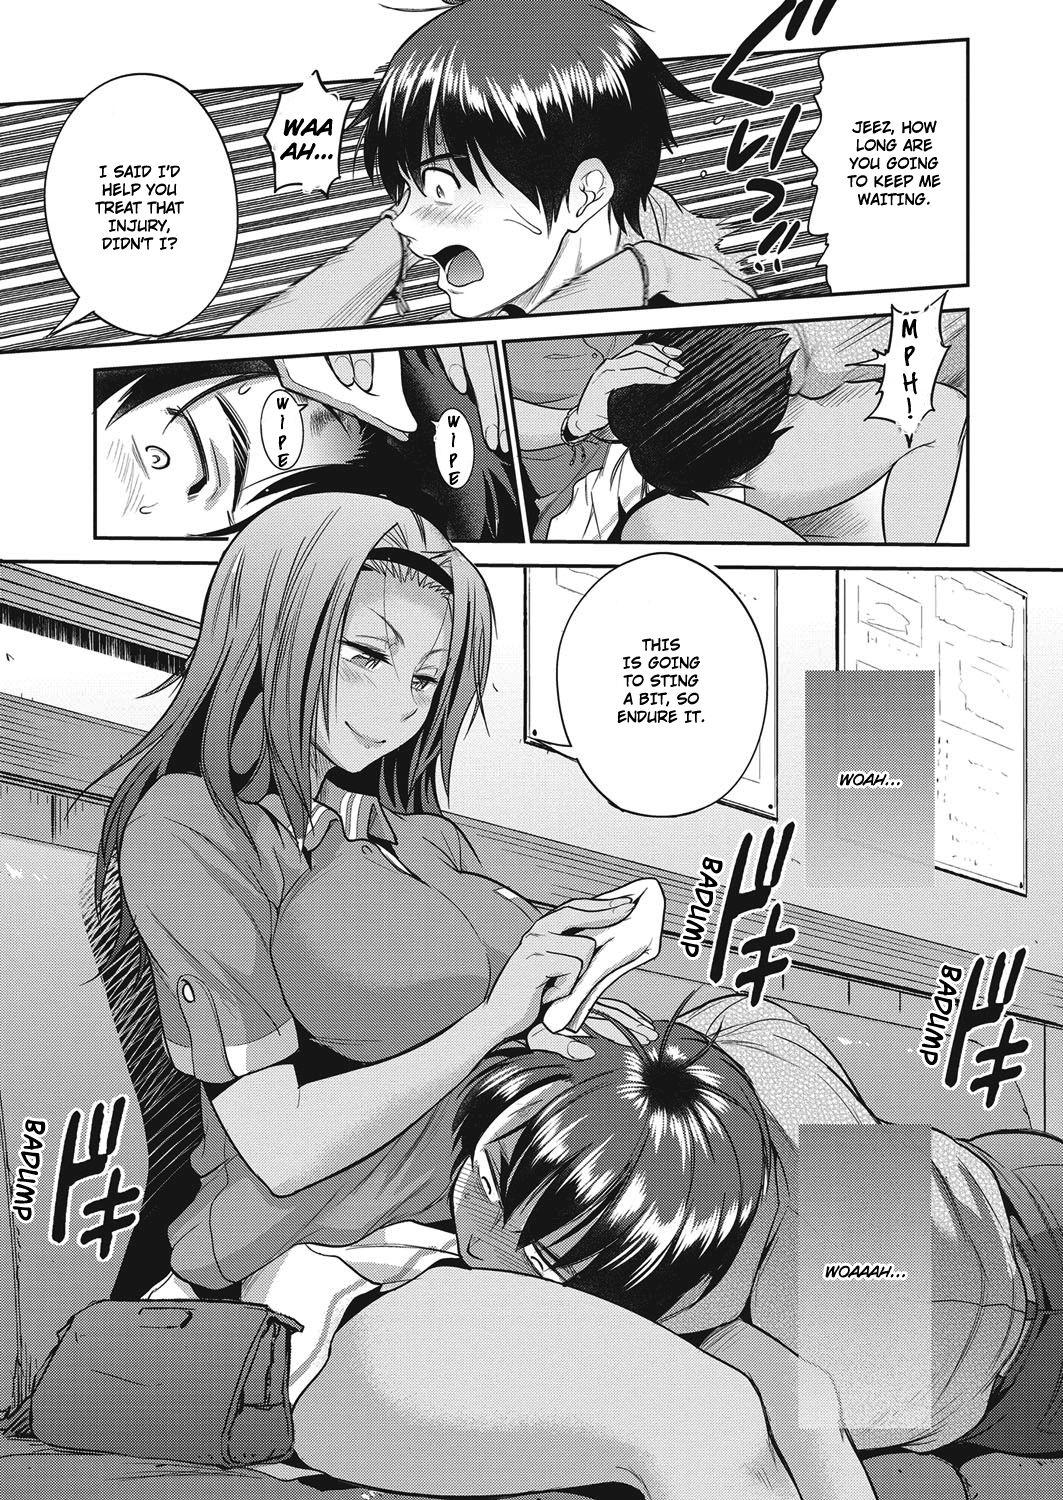 Usa [DISTANCE] Joshi Lacu! - Girls Lacrosse Club ~2 Years Later~ Ch. 3 (COMIC ExE 04) [English] [TripleSevenScans] [Digital] Amateurs Gone - Page 3